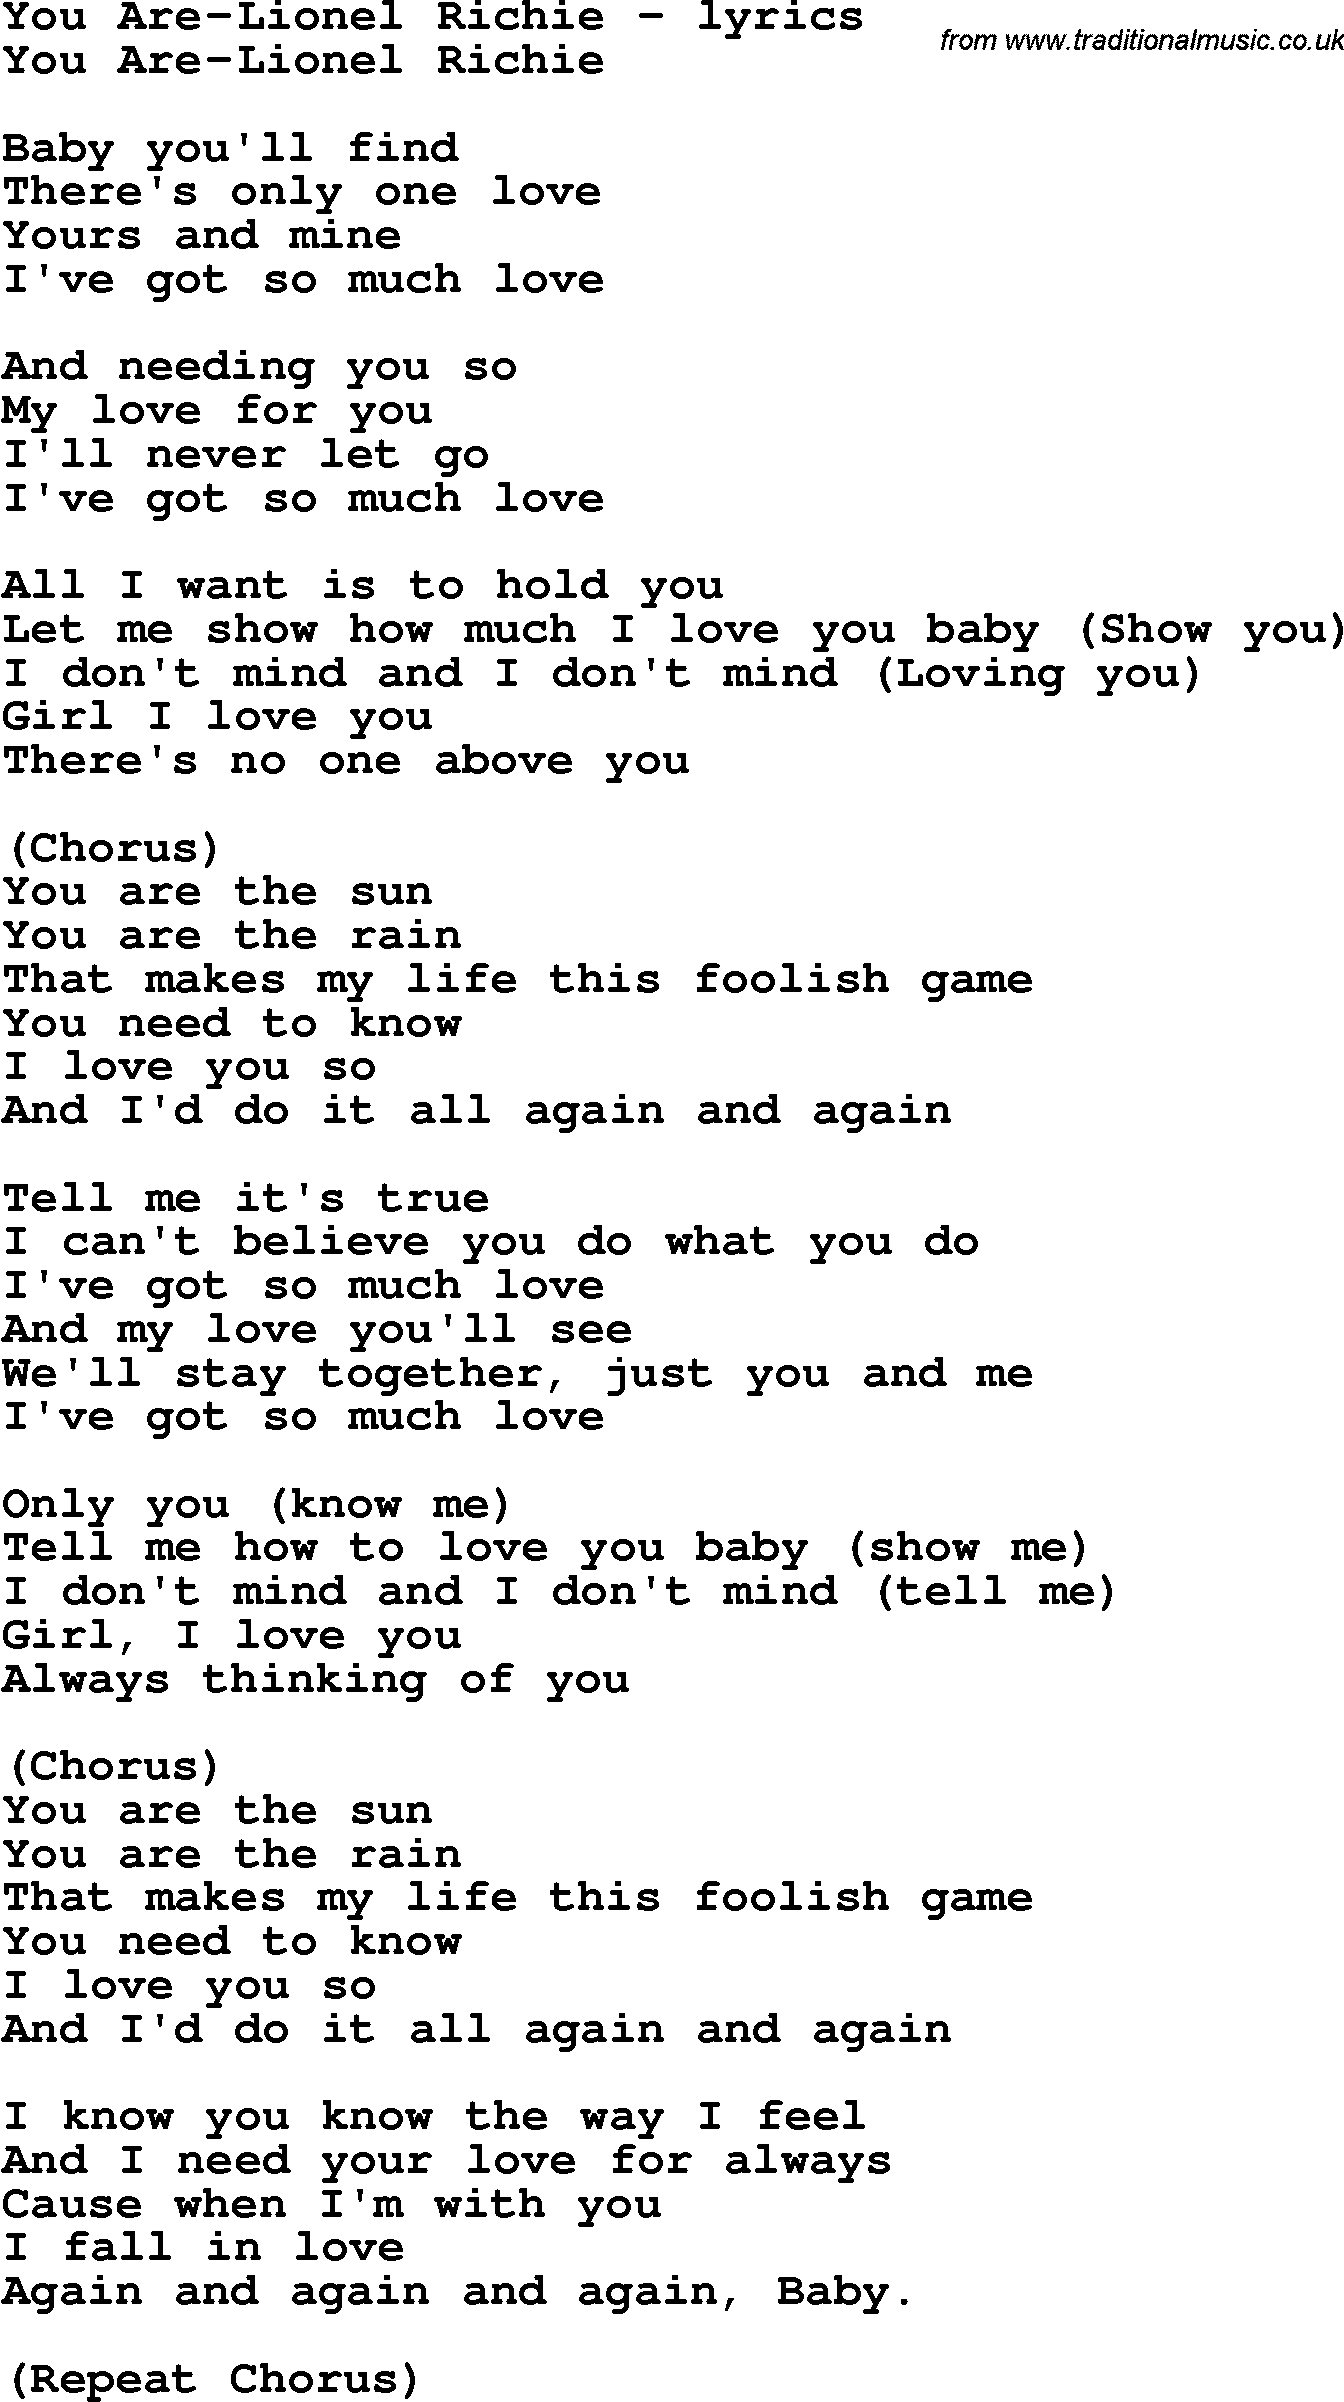 Love Song Lyrics For You Are Lionel Richie